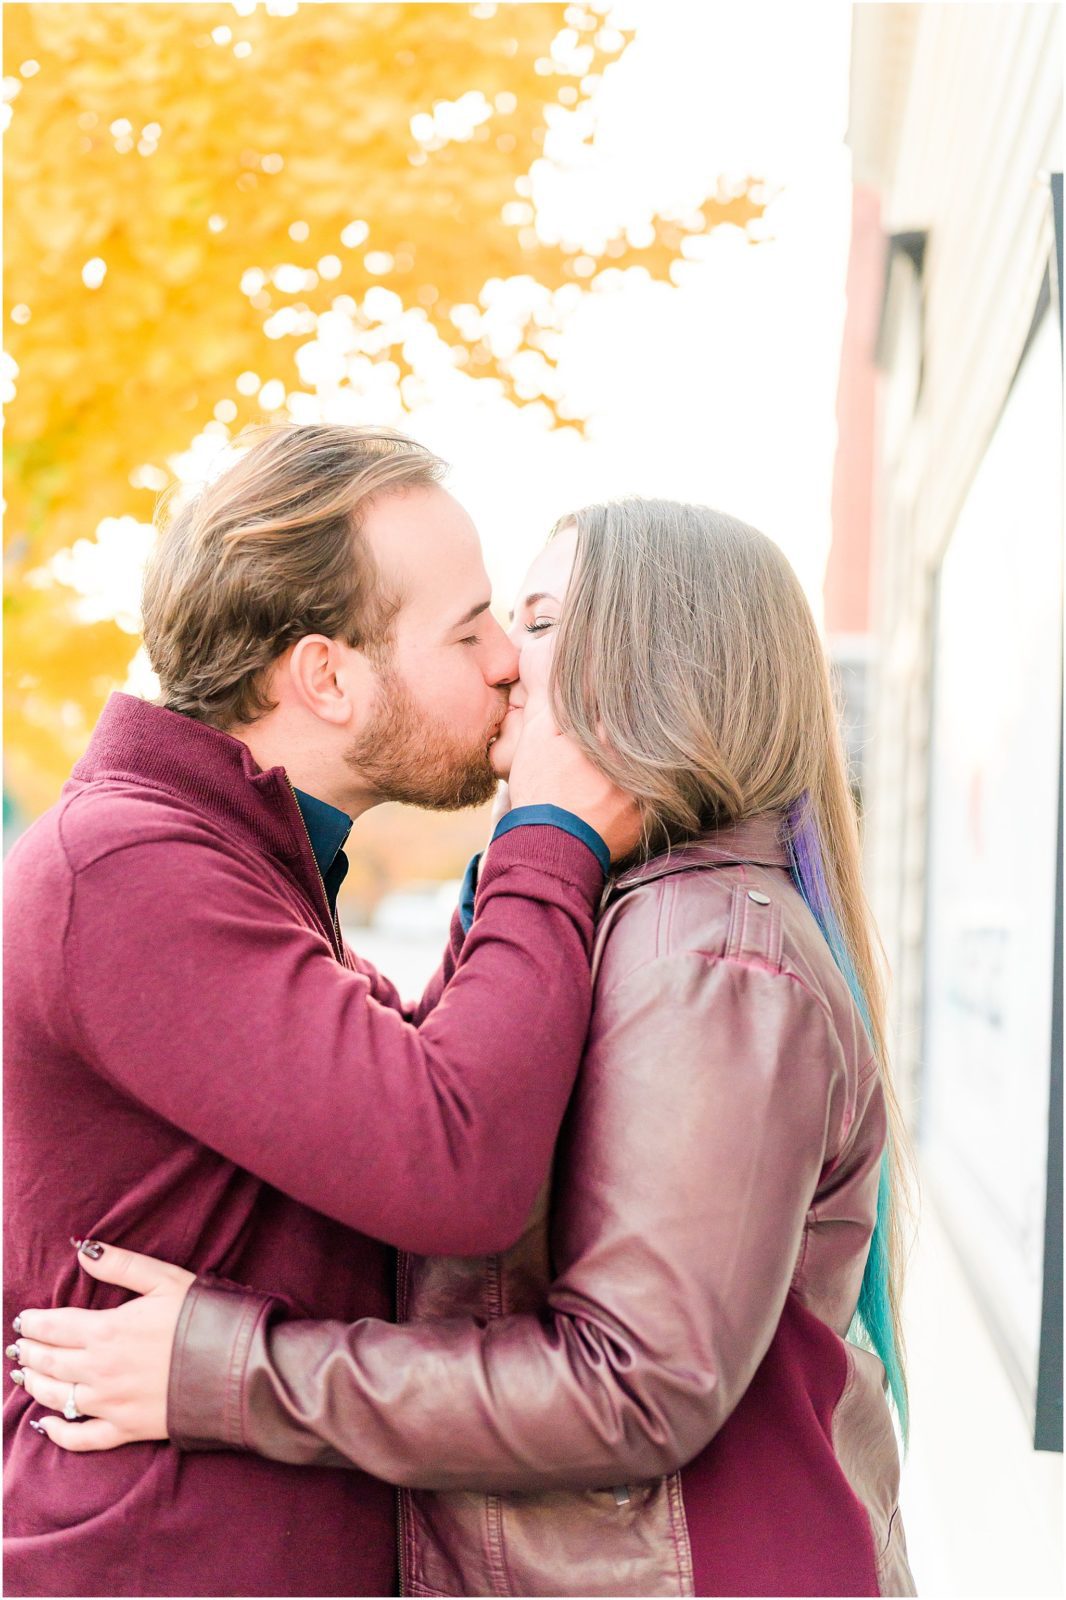 Downtown Zionsville engagement session